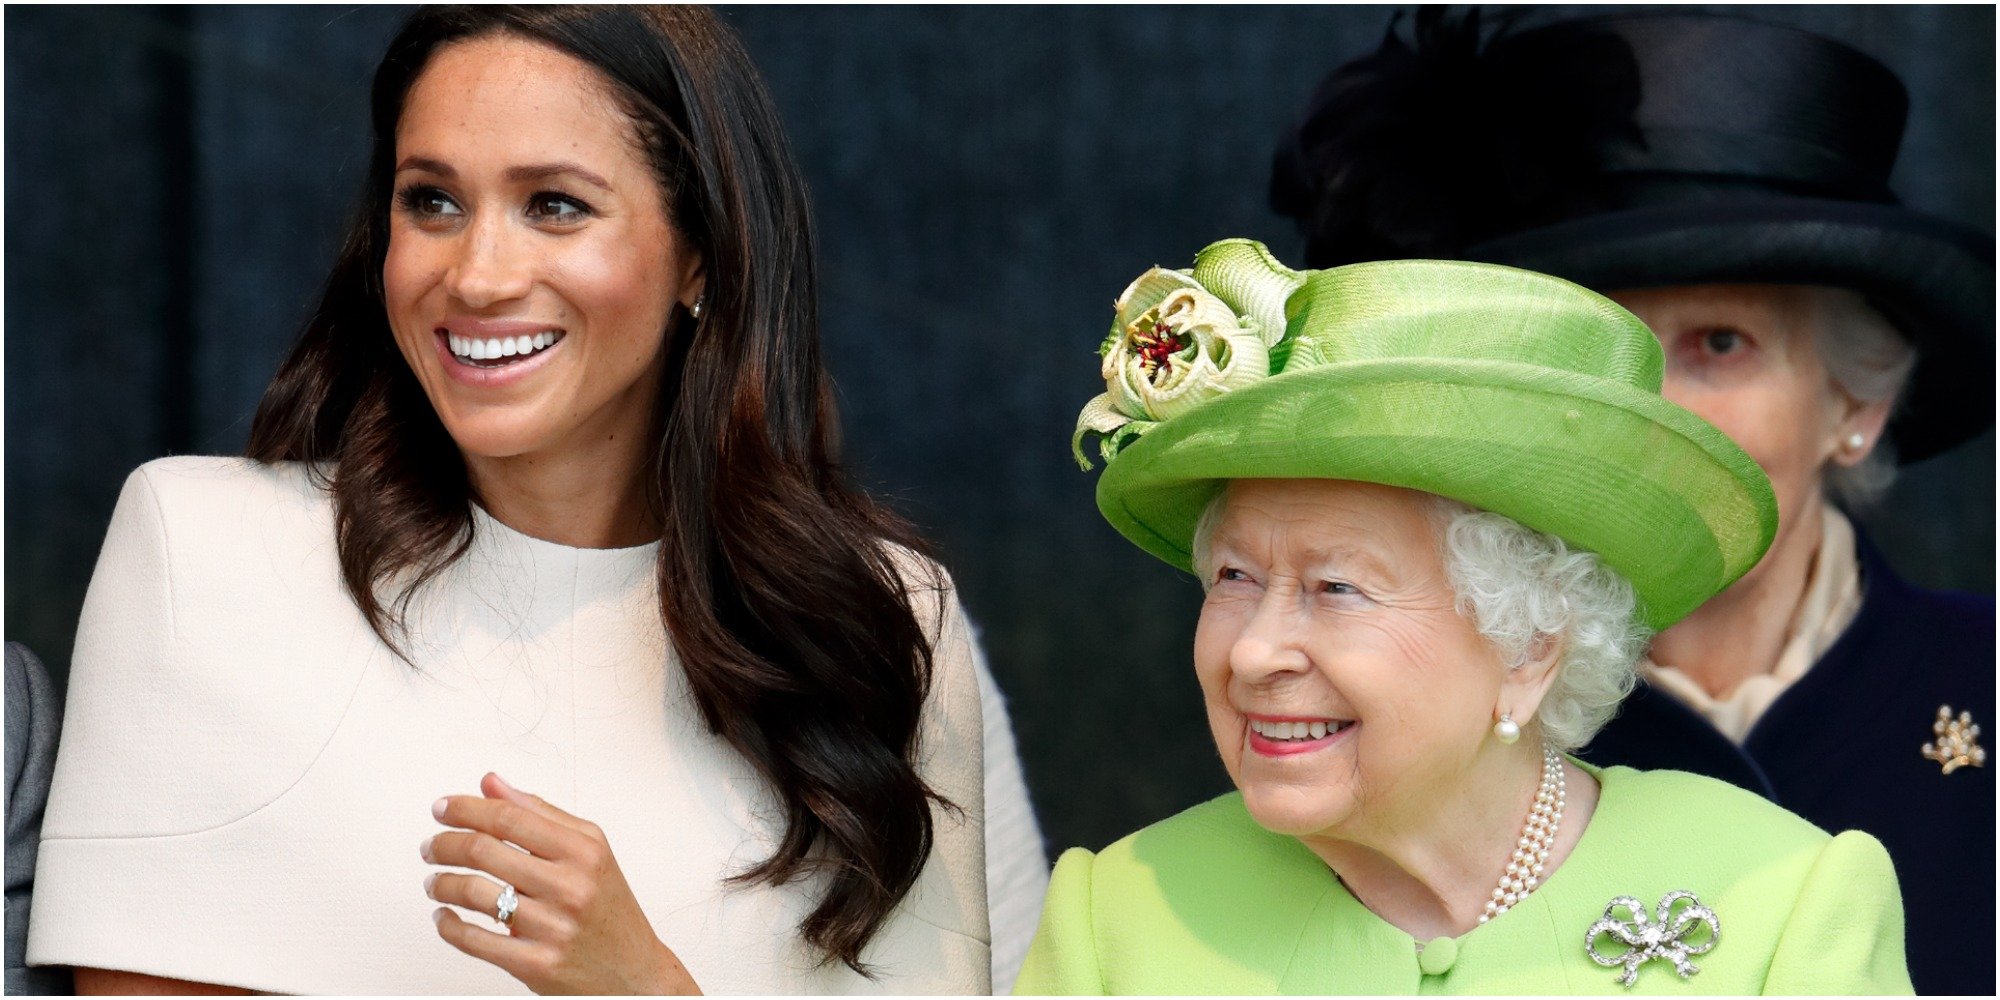 Meghan Markle and Queen Elizabeth smile for the cameras in a candid shot.